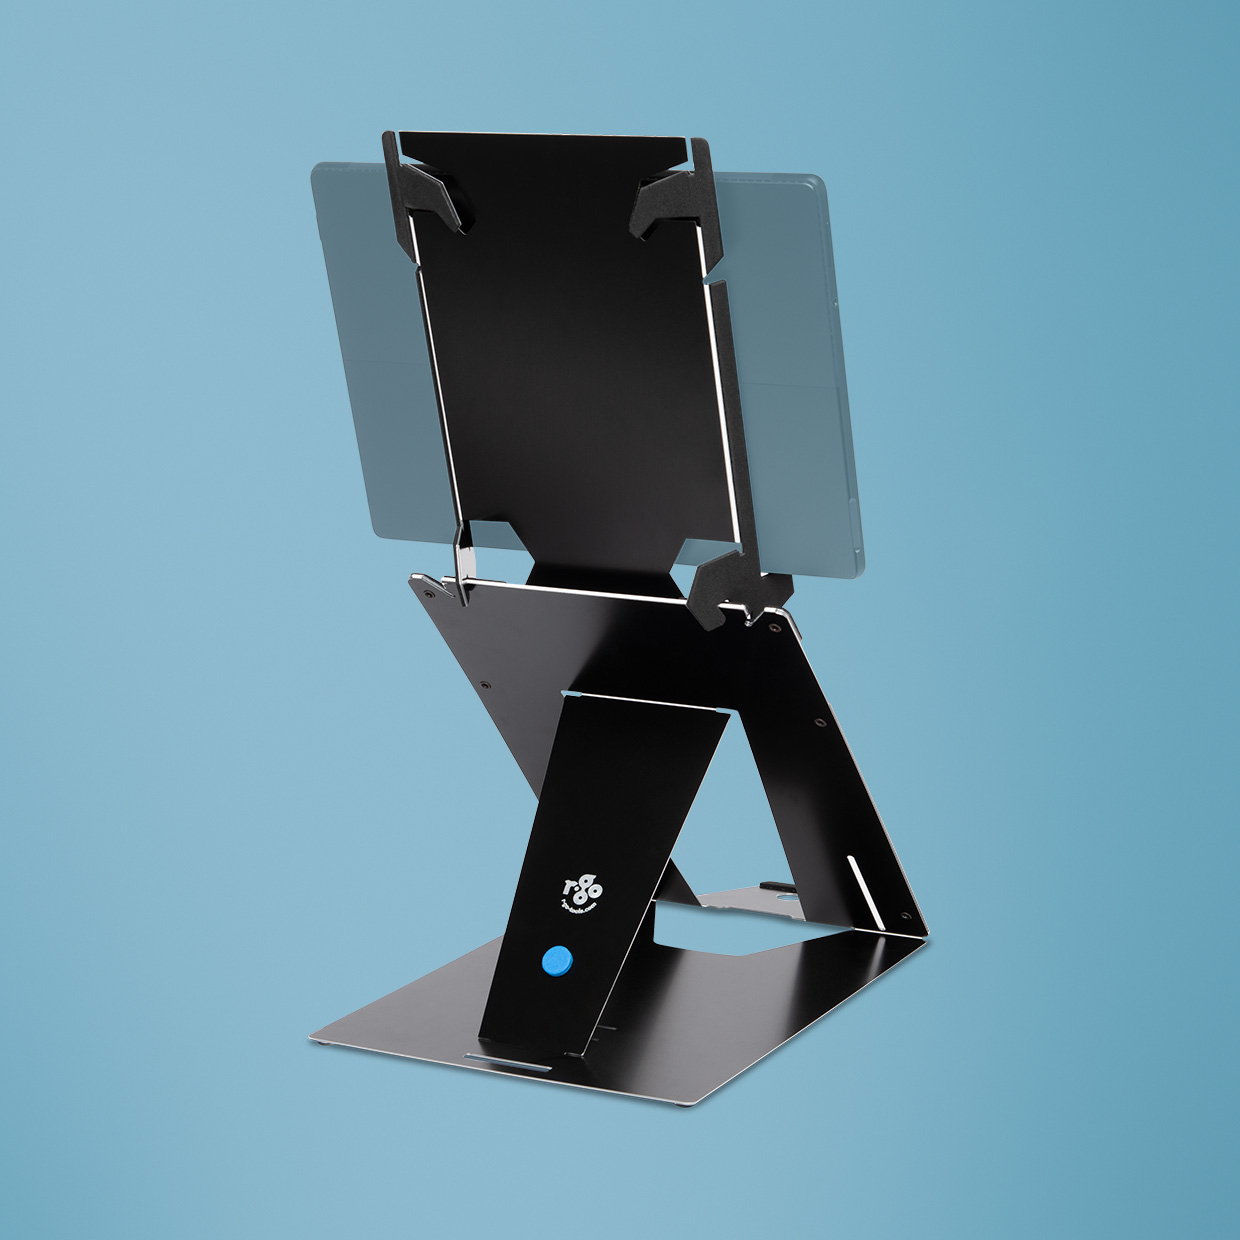 R-Go Riser Duo Tablet and Laptop stand - R-Go Tools